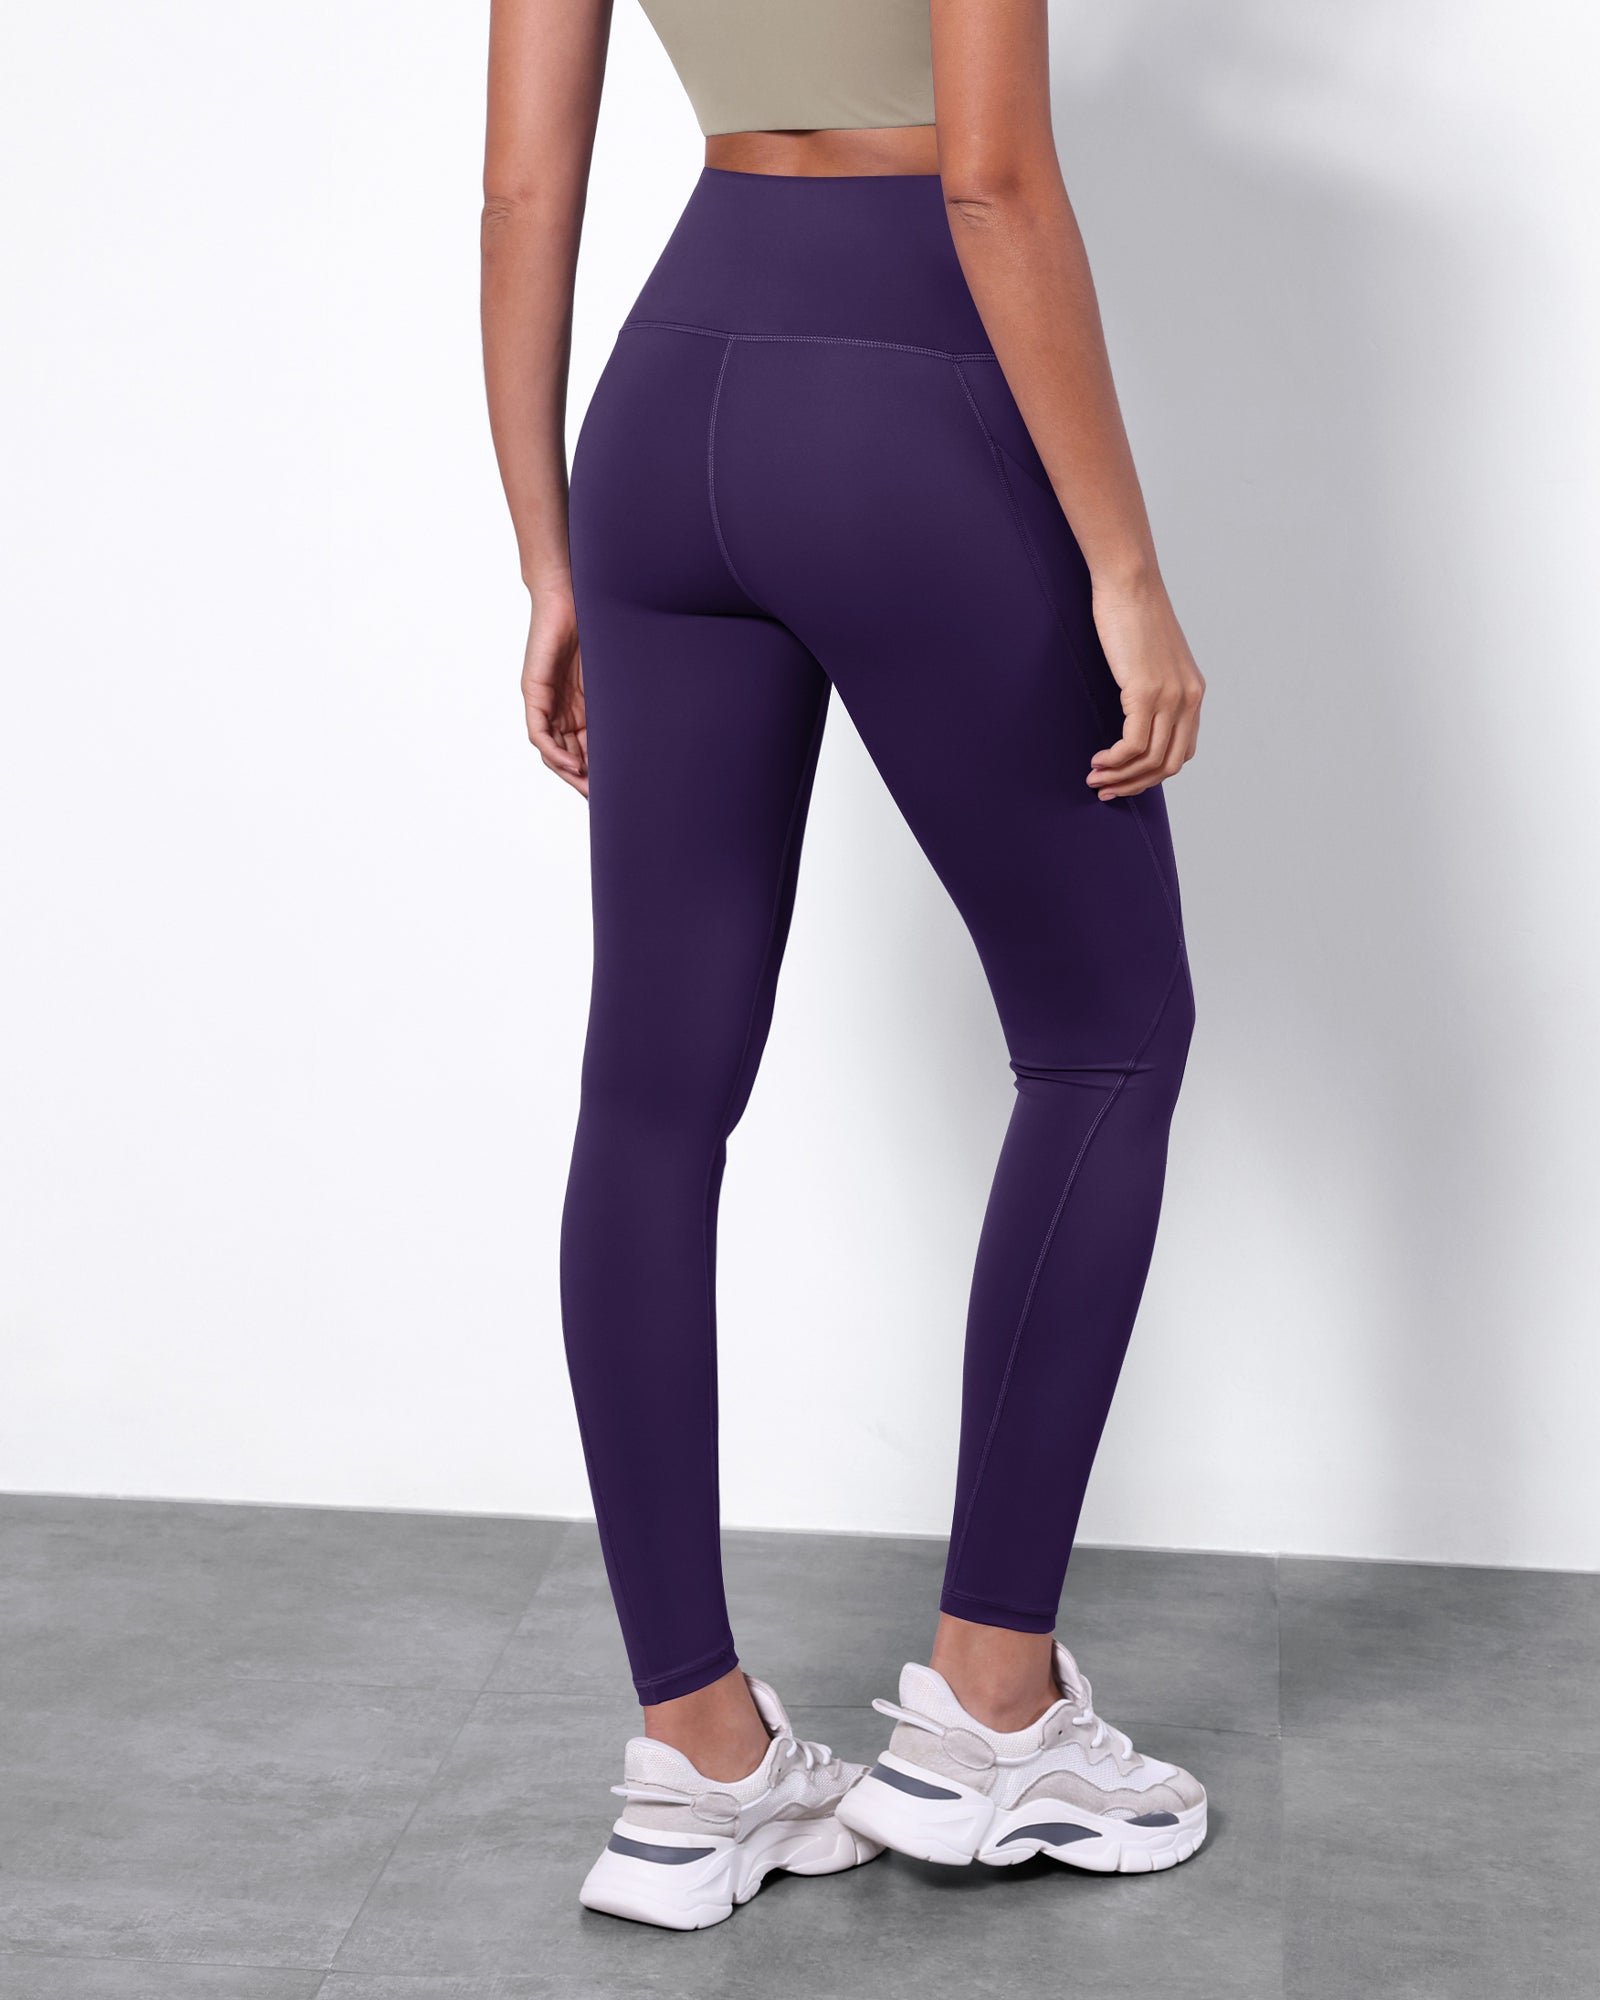  ODODOS ODCLOUD Buttery Soft Lounge Yoga Capris For Women 23 High  Waist Non See Through Cropped Leggings